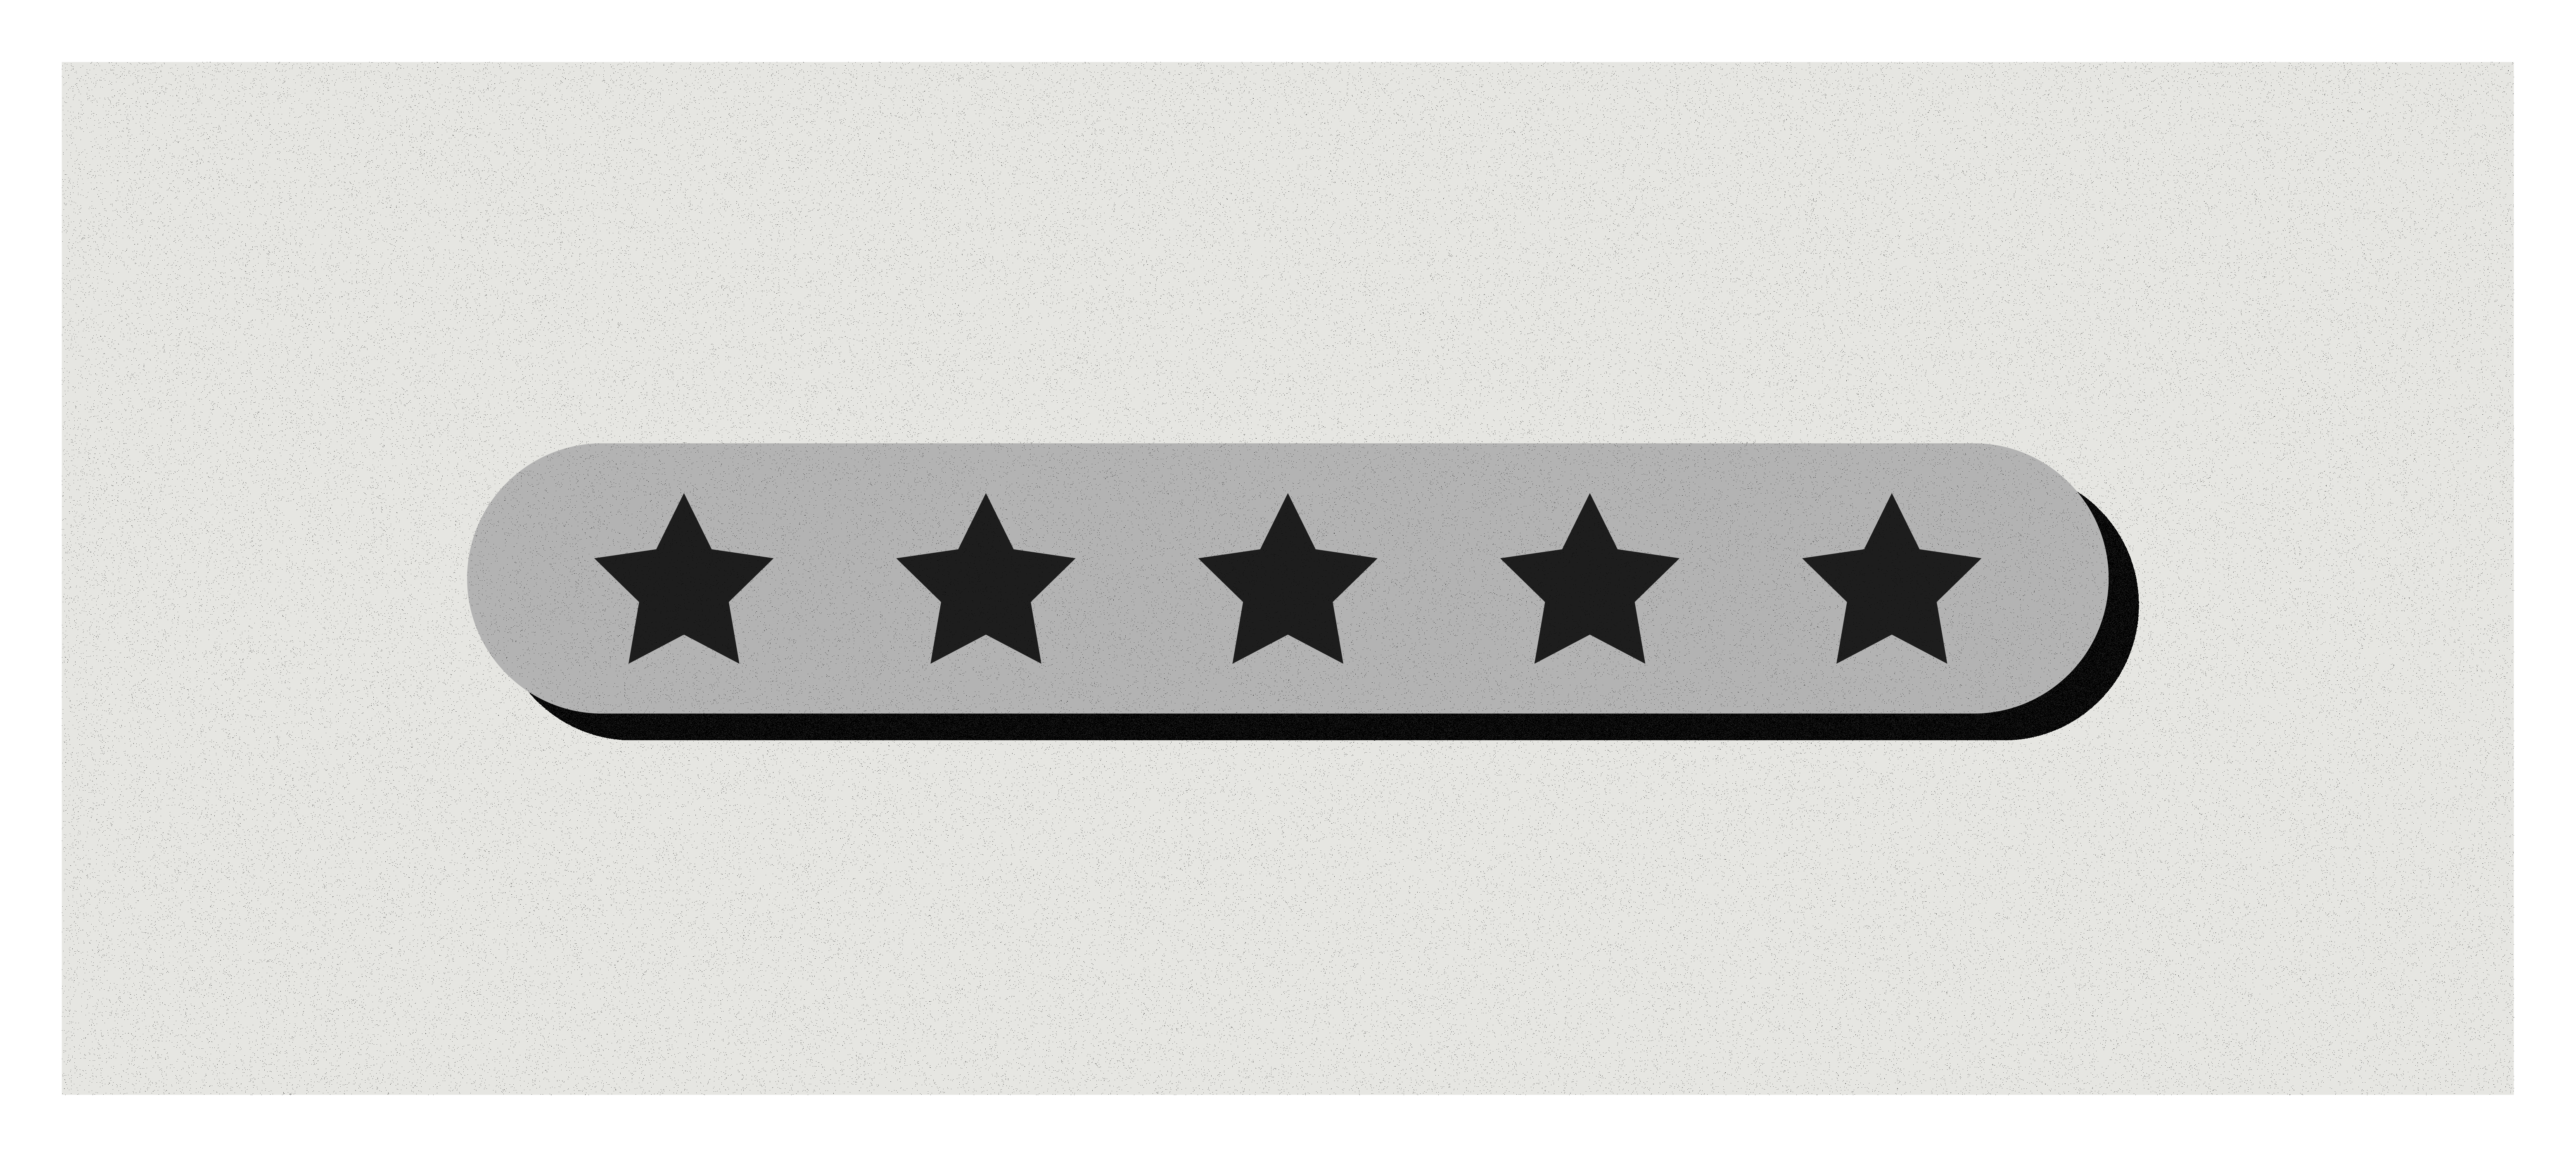 An illustration of five black stars on a gray oval against a gray background.